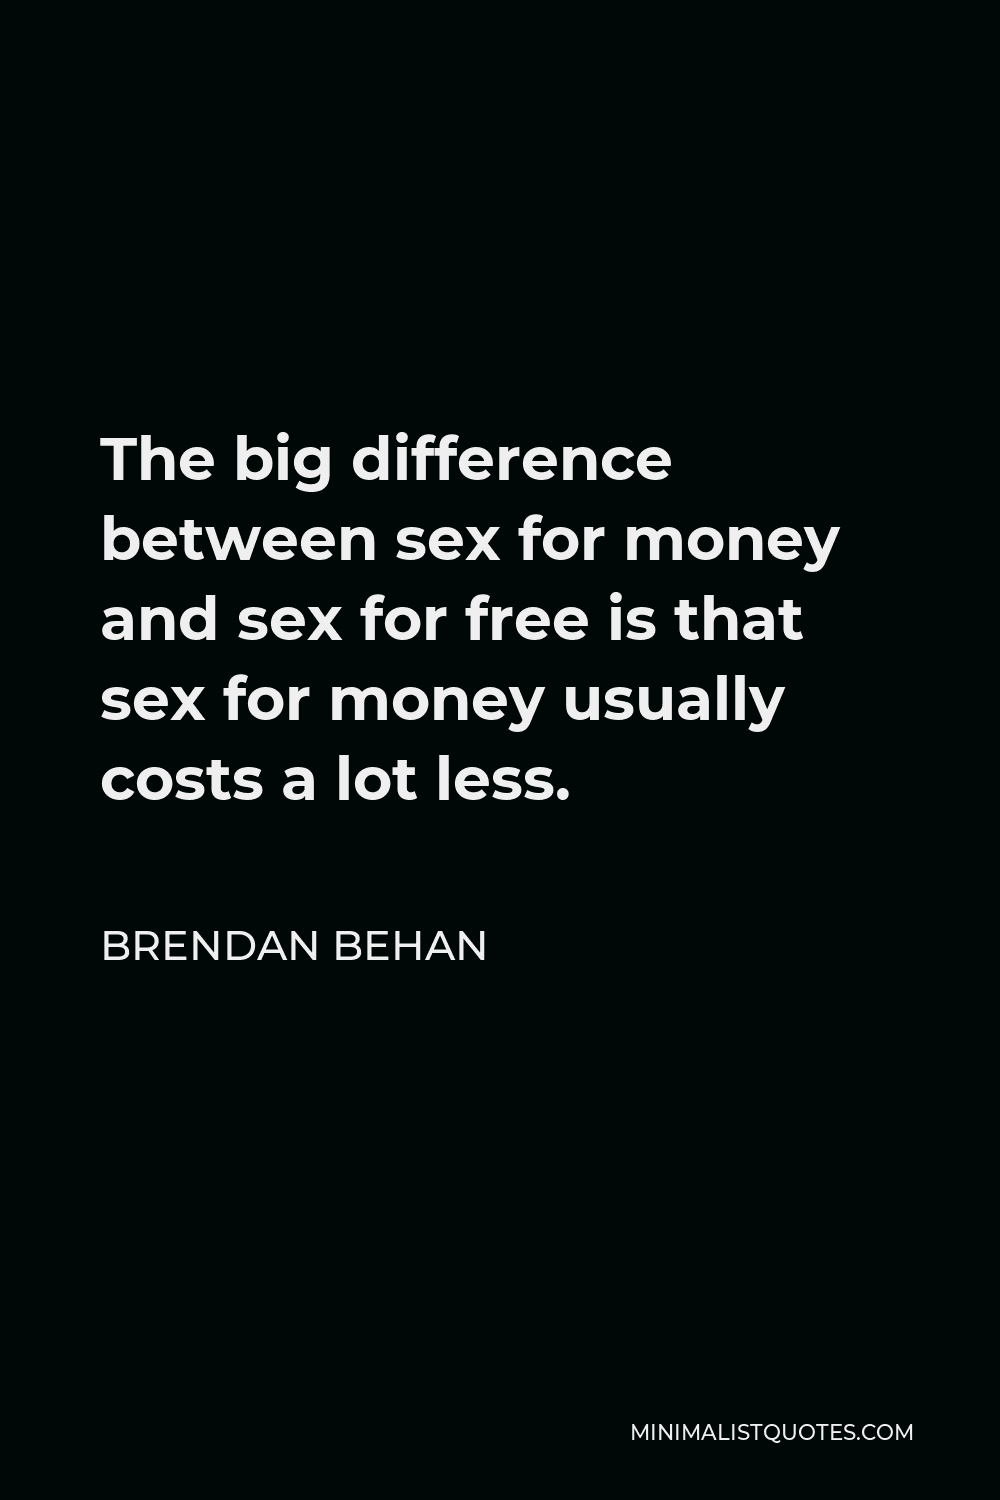 Brendan Behan Quote - The big difference between sex for money and sex for free is that sex for money usually costs a lot less.